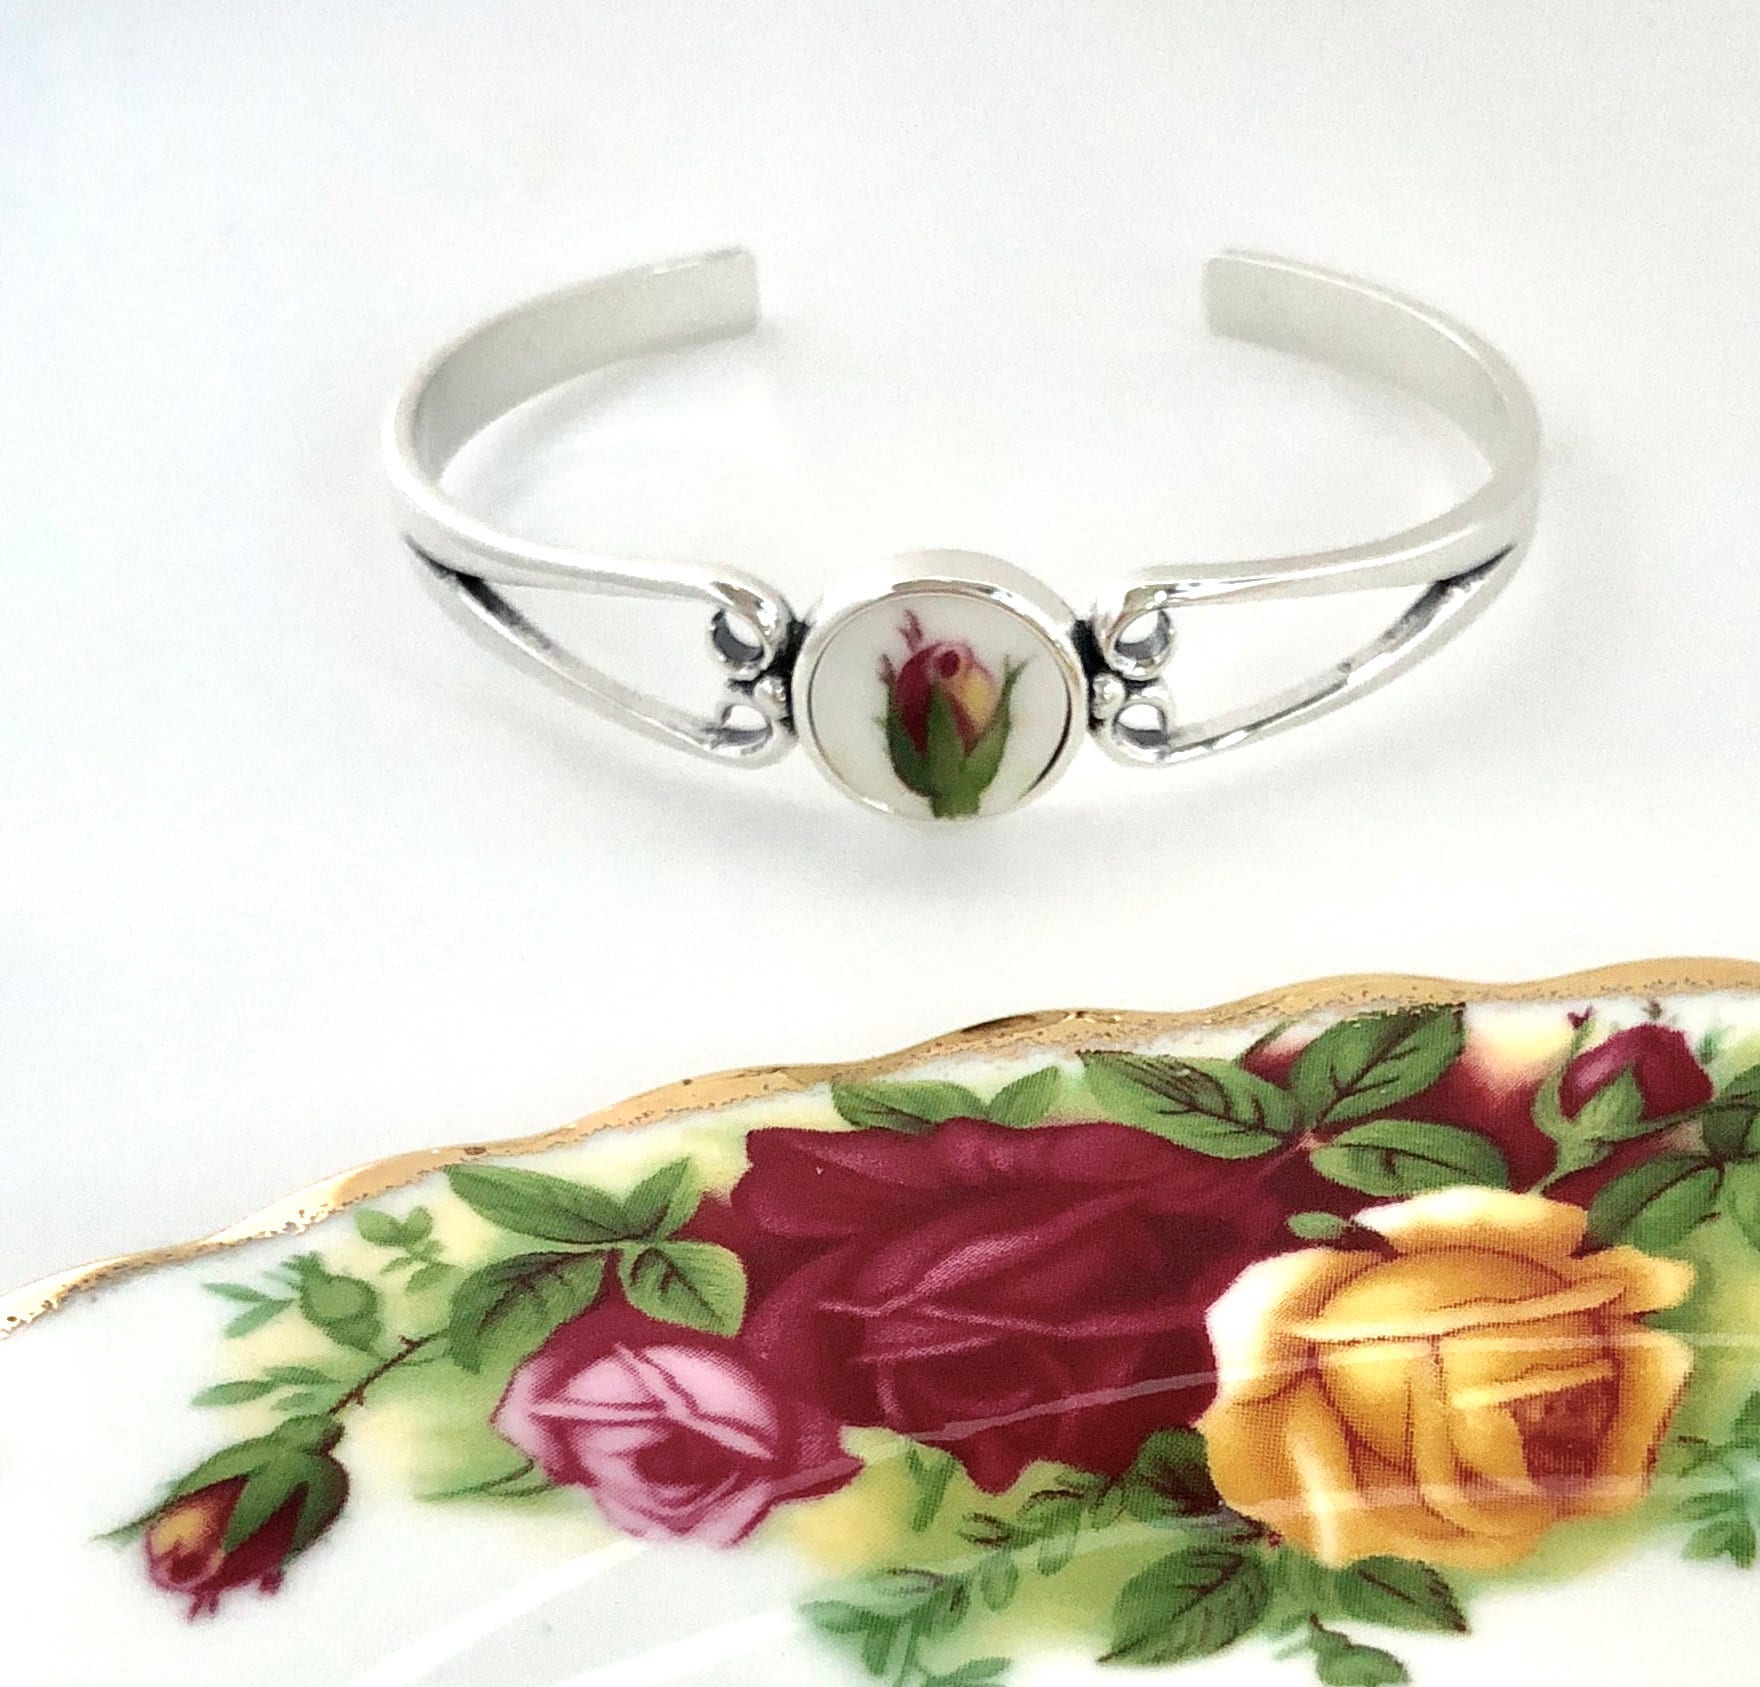 CUSTOM ORDER Silver Cuff China Bracelet, Broken China Jewelry, Custom Jewelry, Mom Gift, Unique Gift for Sister, Made From Your China